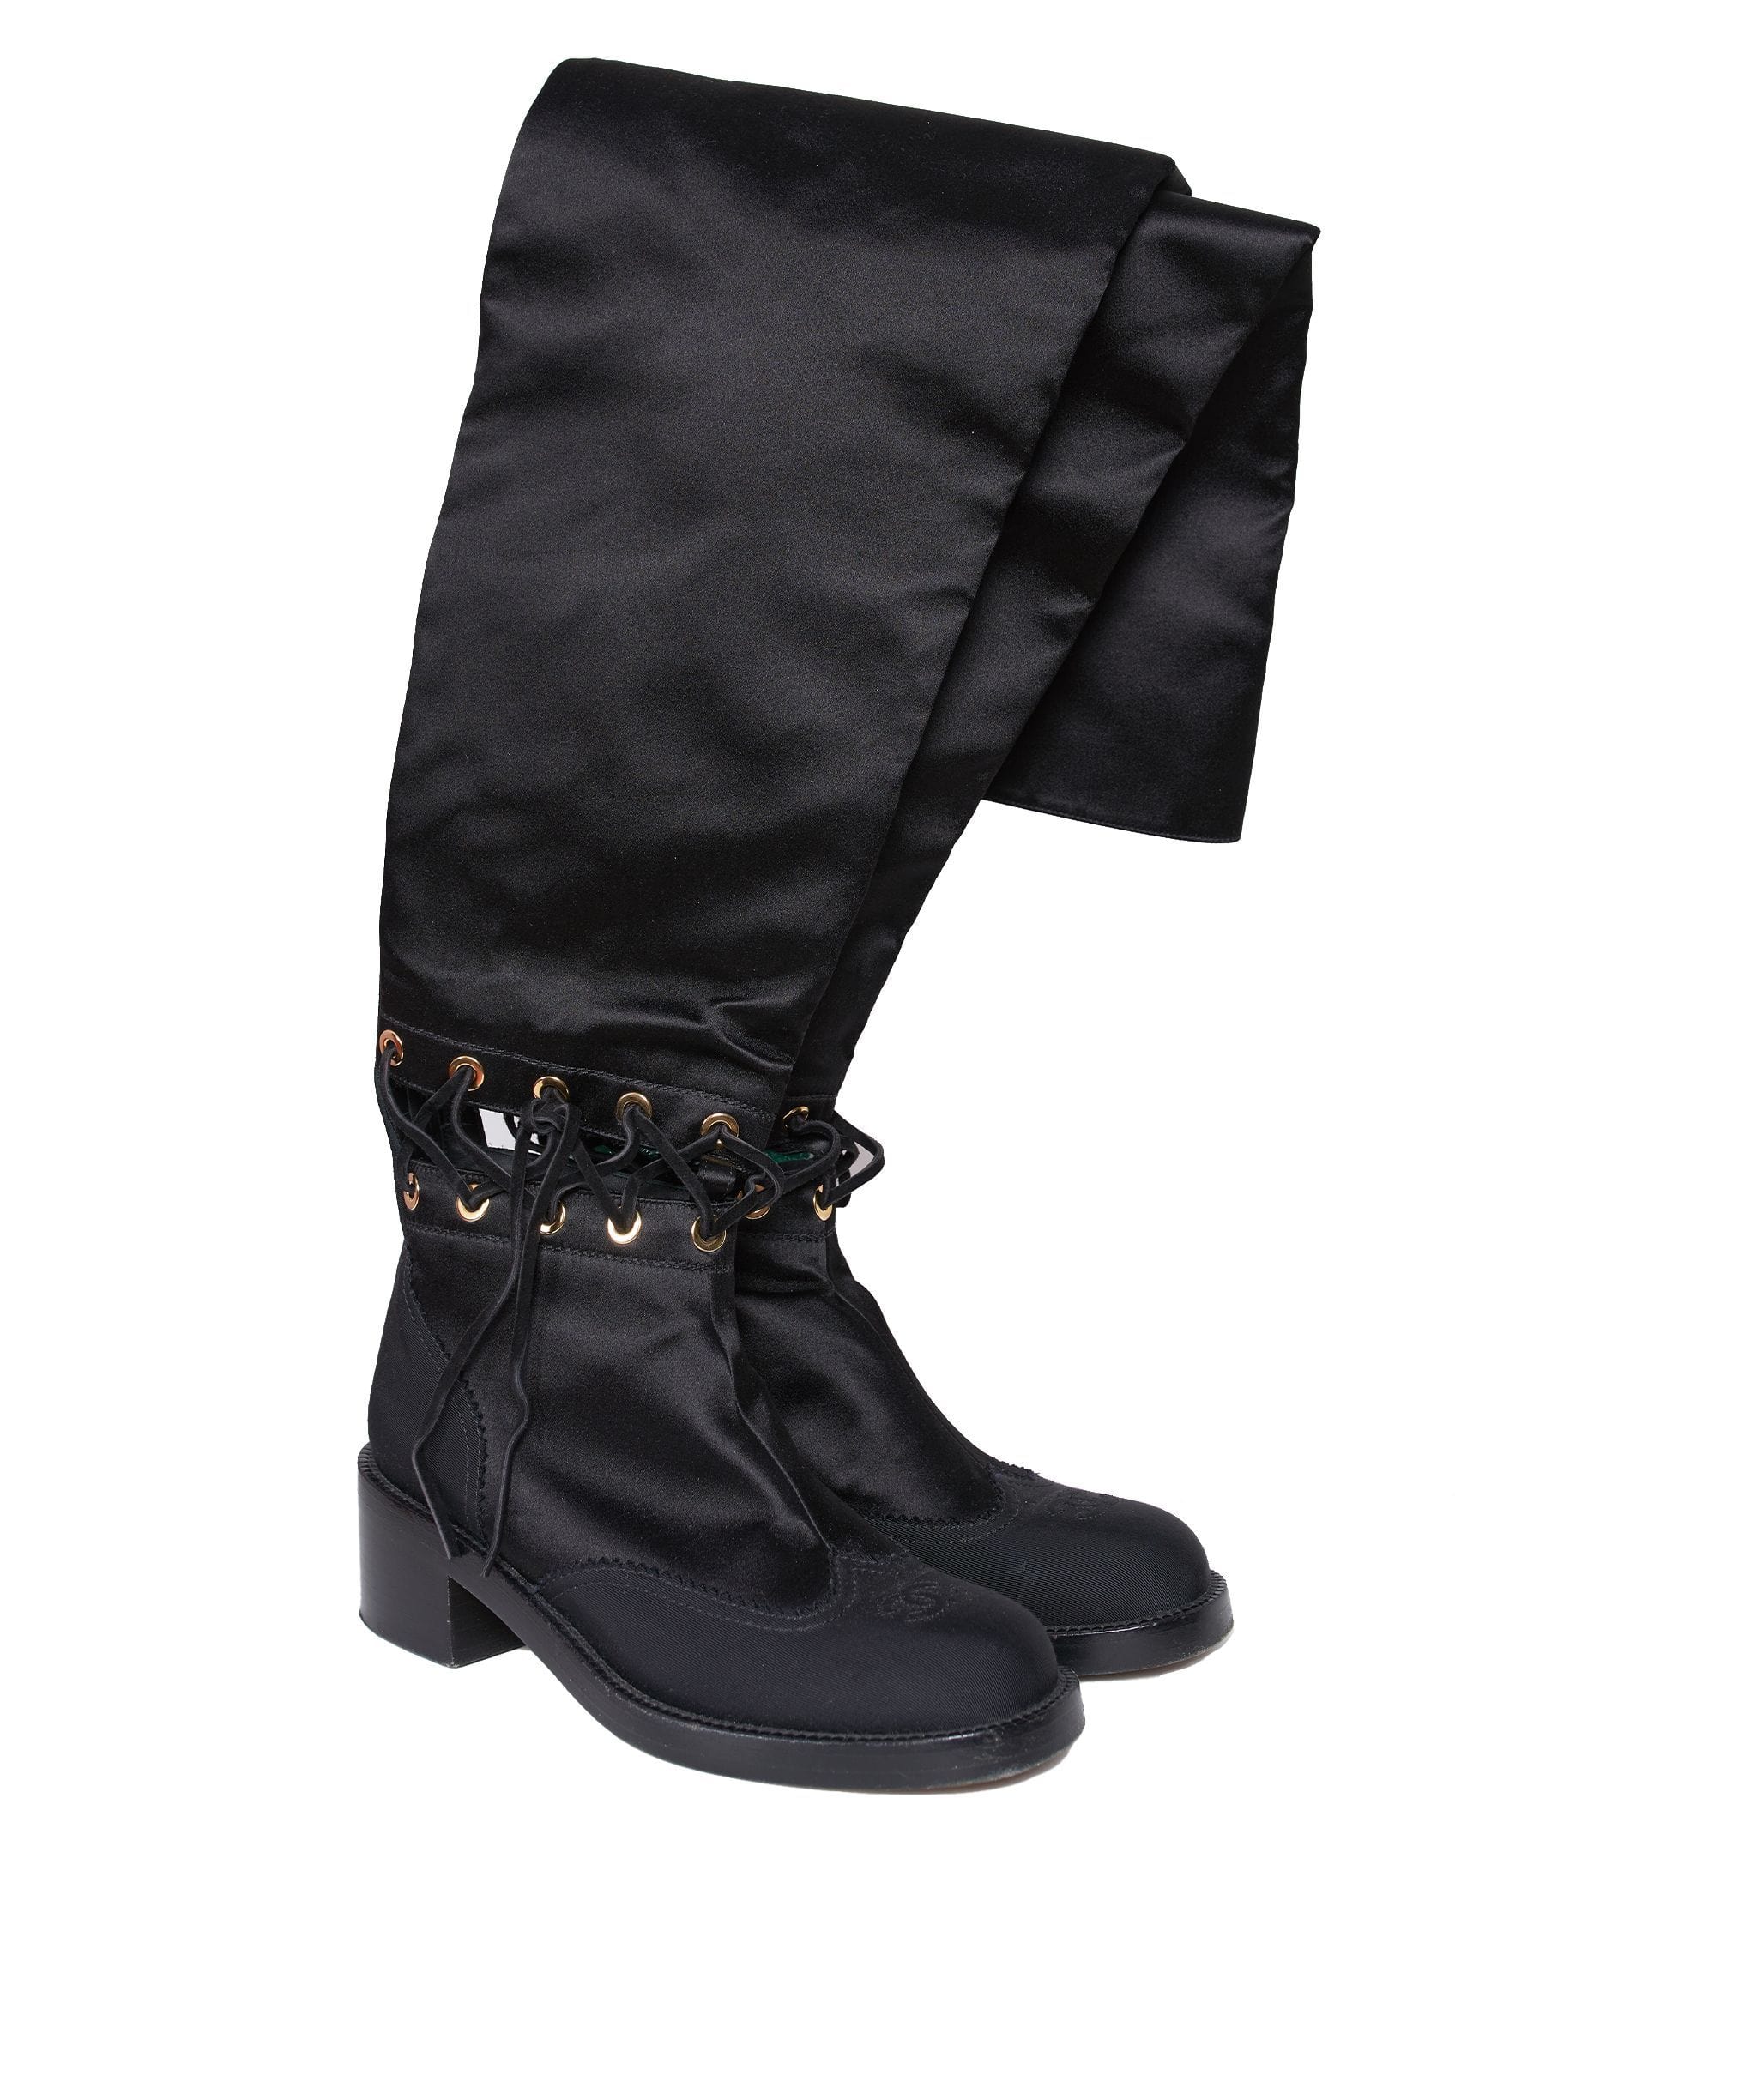 Chanel Chanel boots CW6584